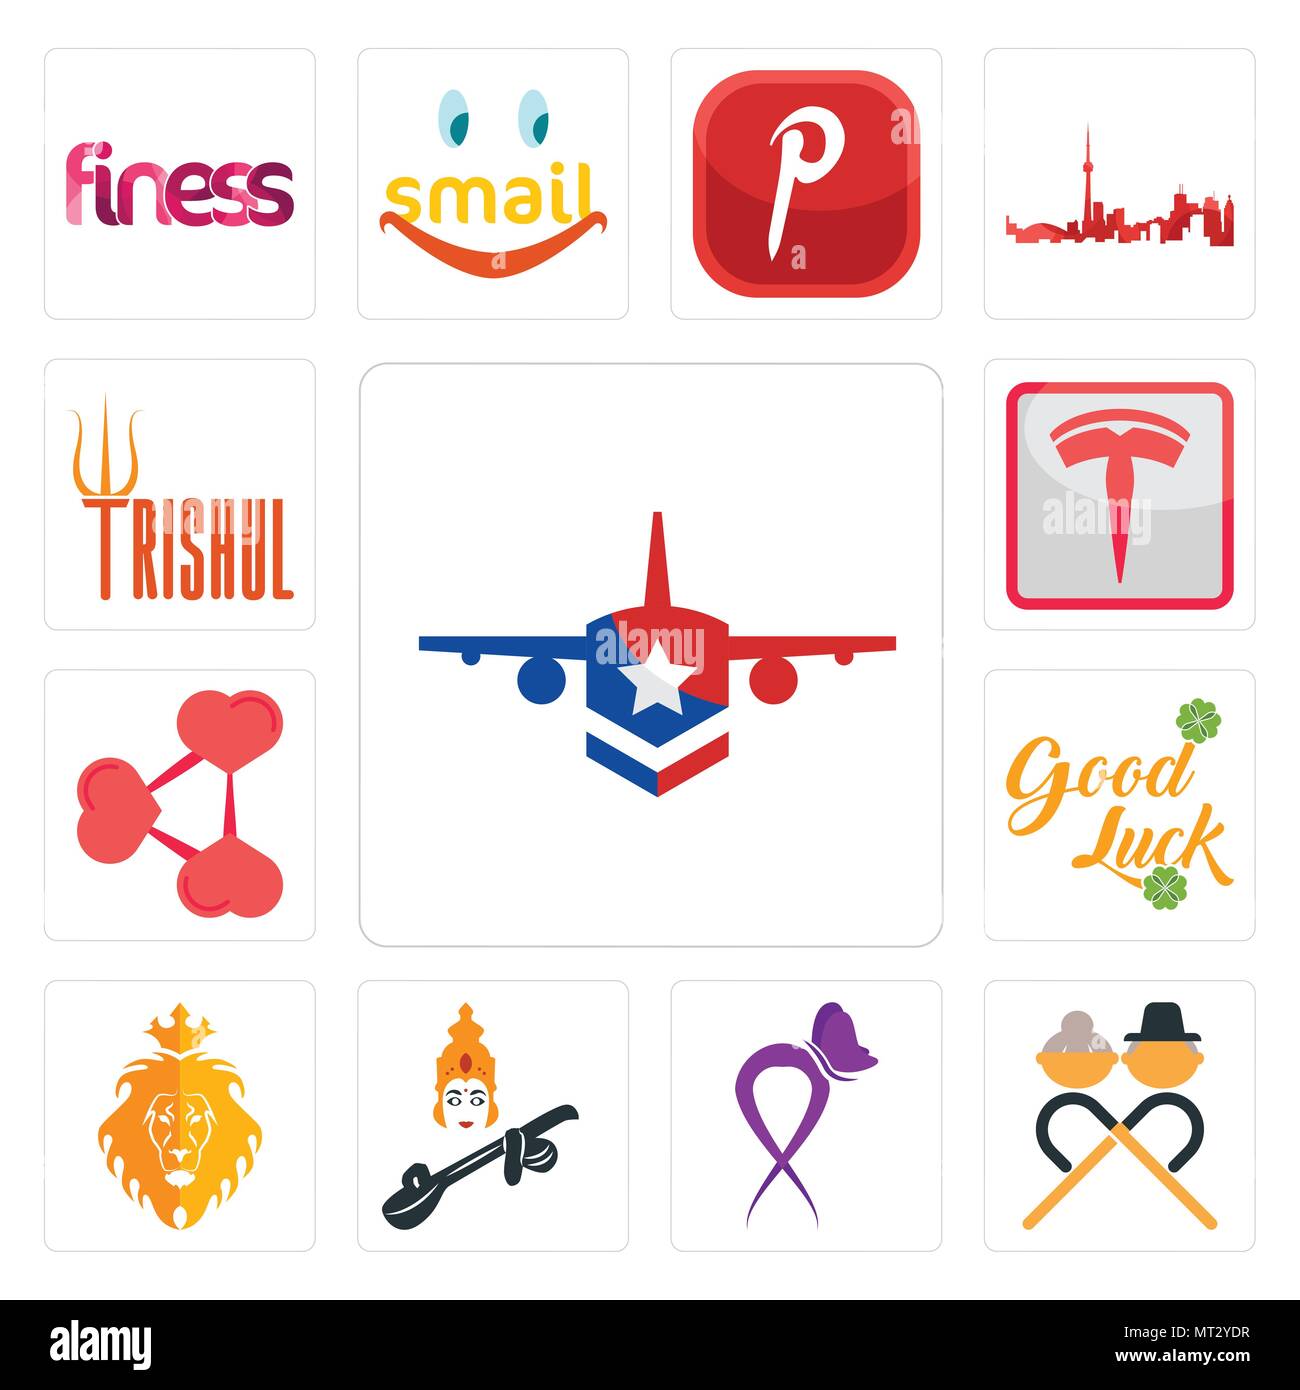 Set Of 13 simple editable icons such as honor flight, senior citizen, lupus, saraswati, judah and the lion, goodluck, share png, tesla, trishul can be Stock Vector